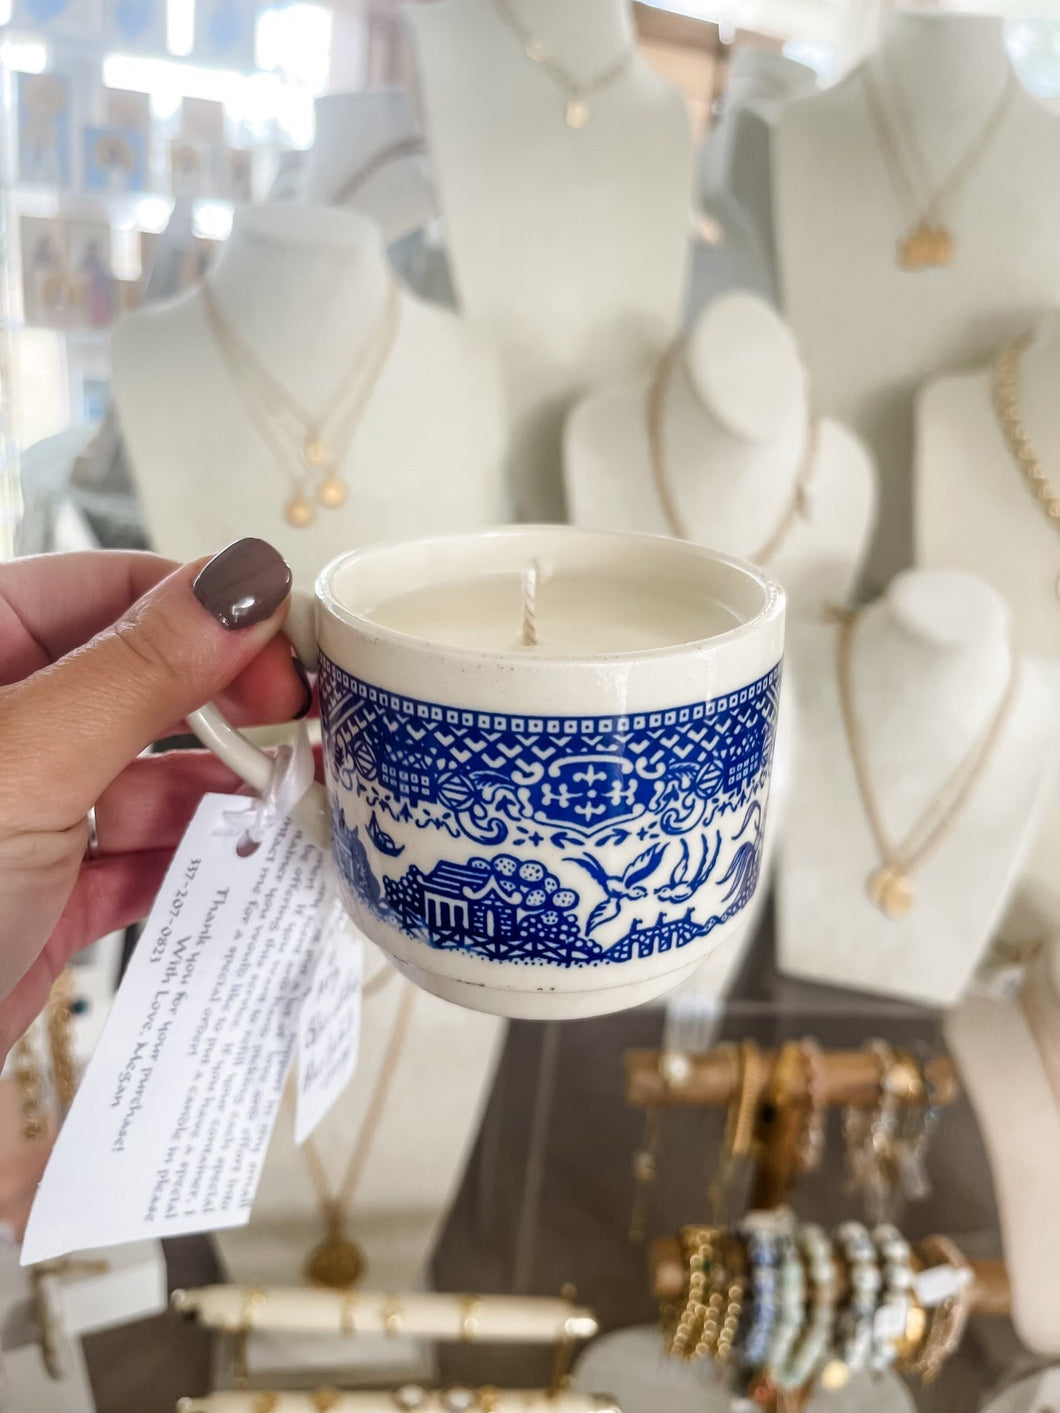 Butterfly Garden Blue and White Tea Cup A scented candle-Belle Reve Designs by Megan Gatte